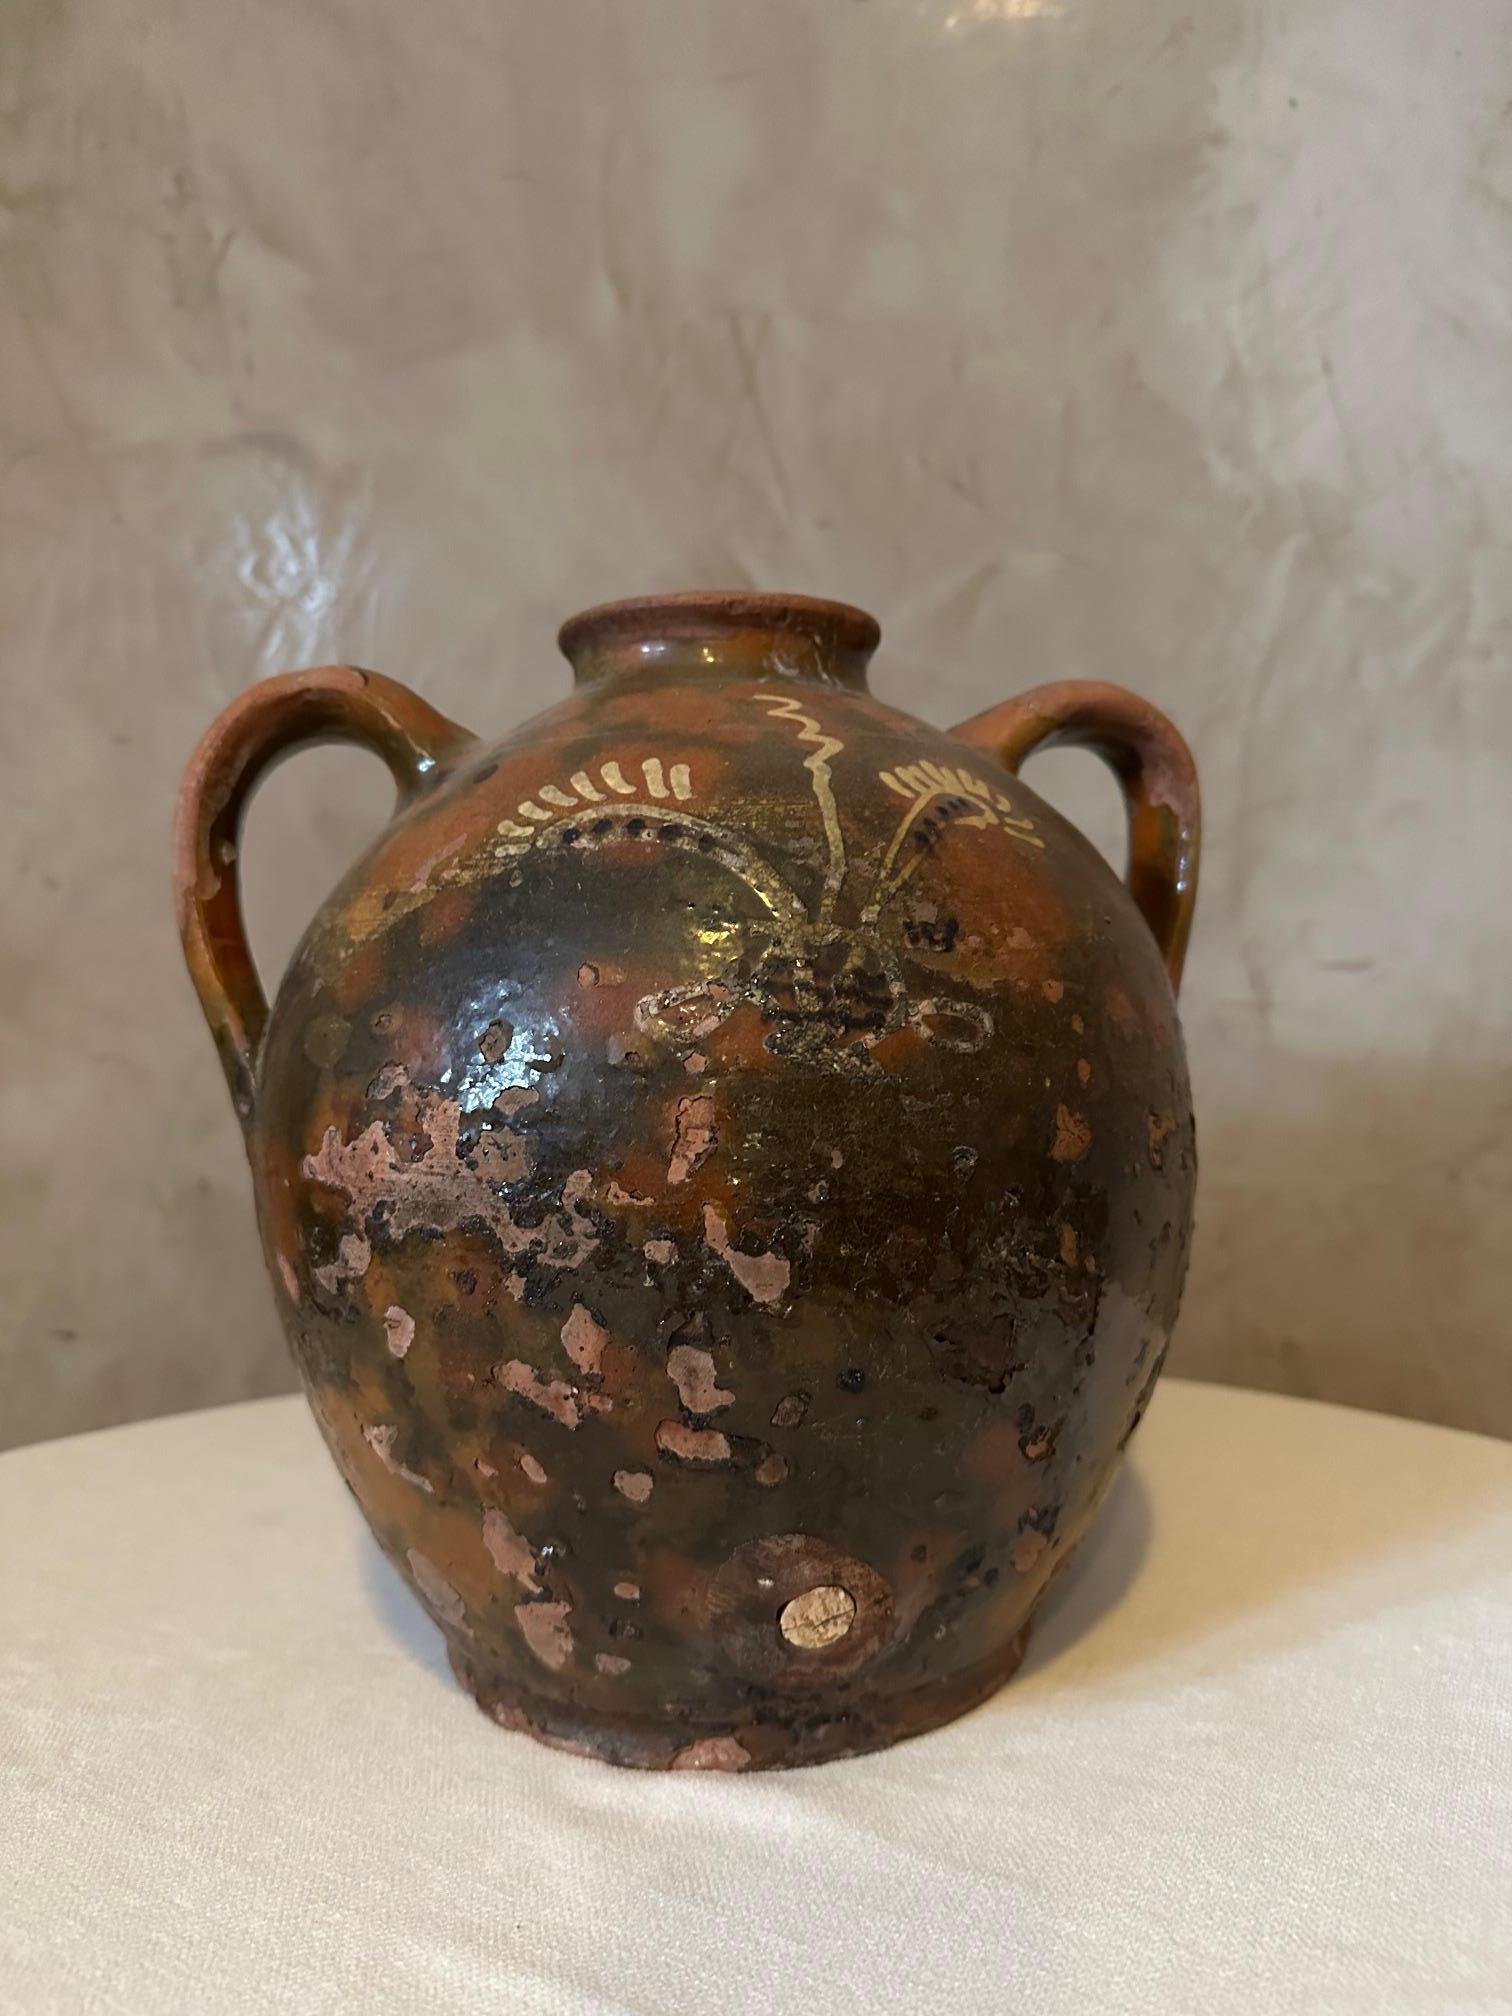 Very Nice rustic French glazed terracotta oil jug from the 19th century, with wavy lines and nicely distressed appearance. 
Created in France during the 19th century, this glazed terracotta pottery piece features a brown circular body accented with